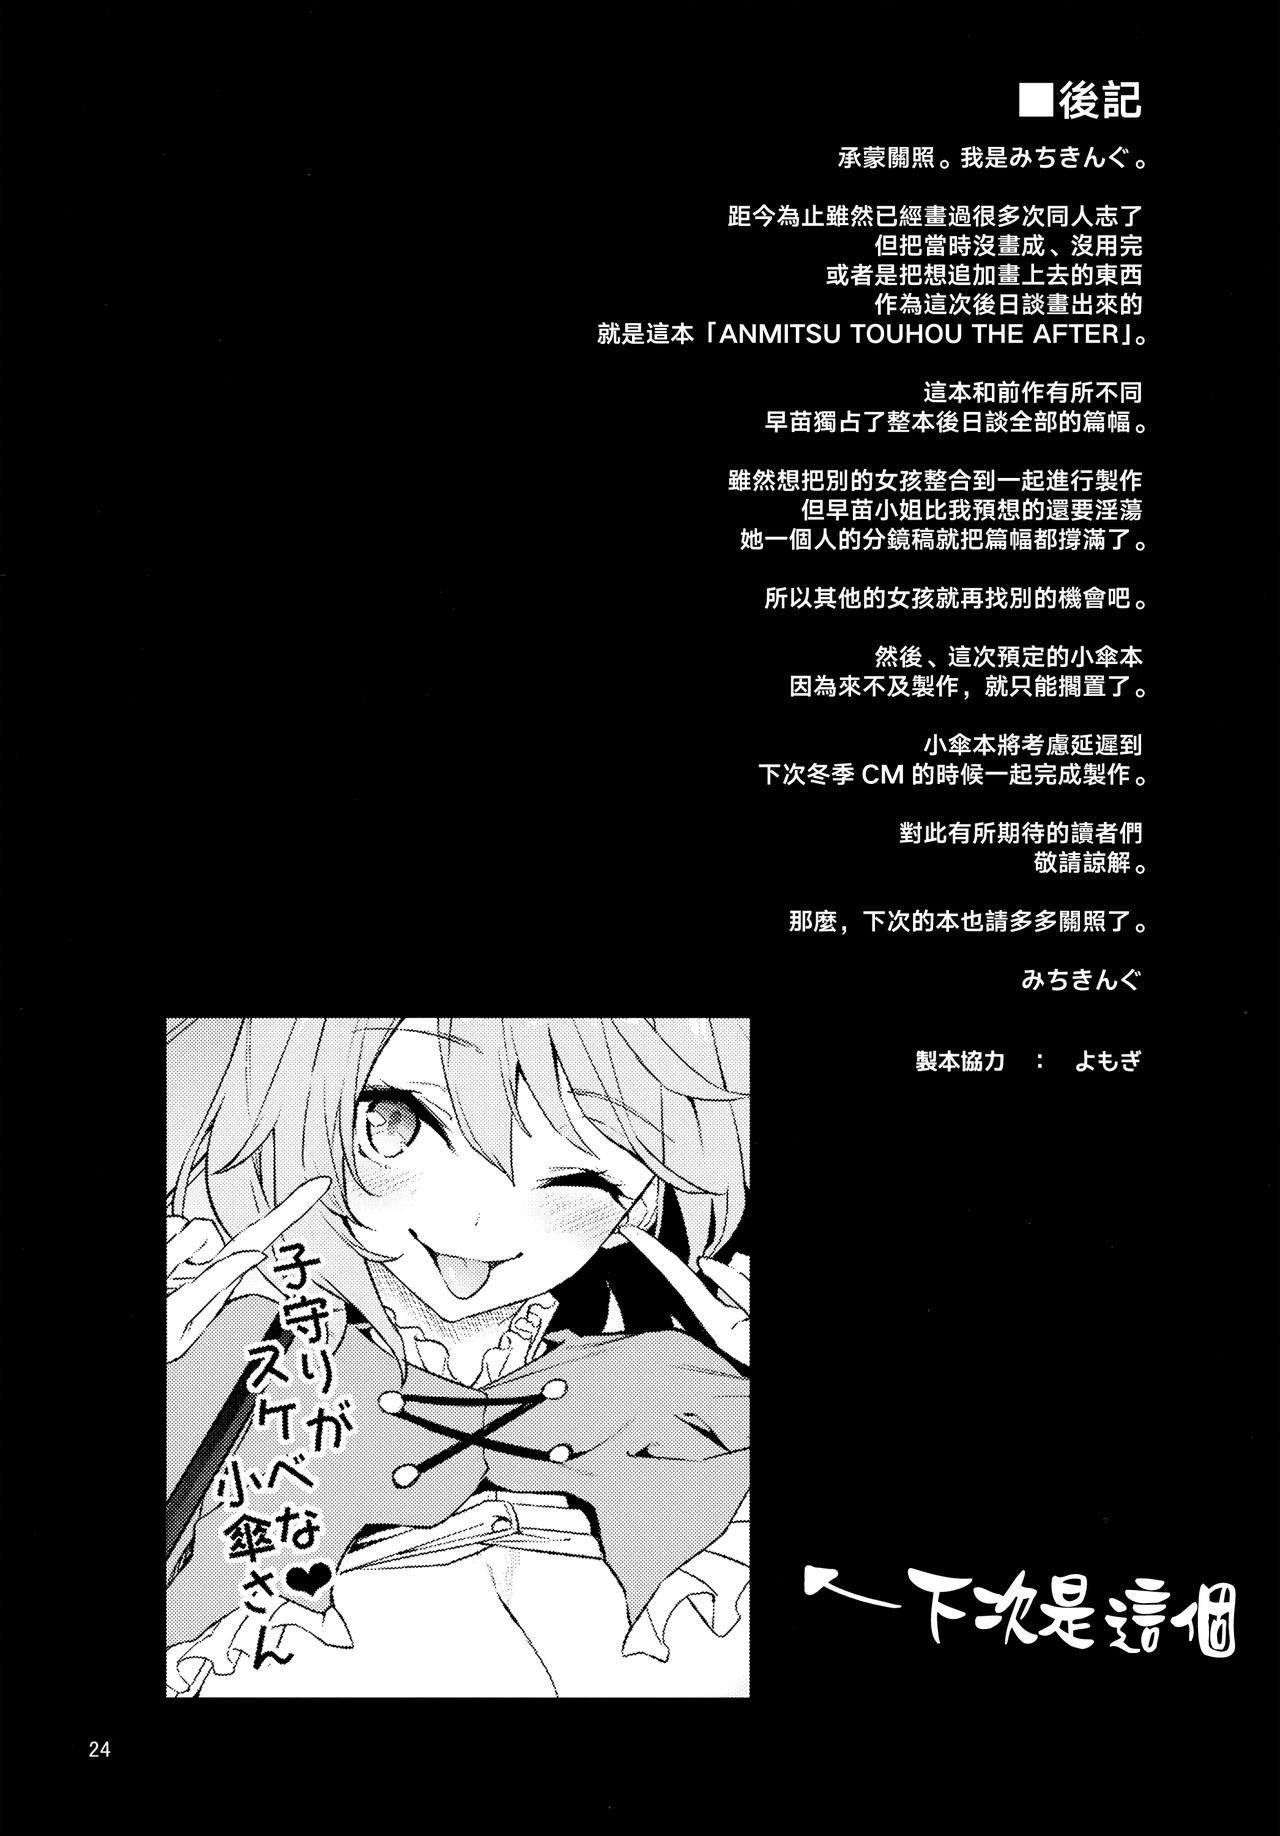 ANMITSU TOUHOU THE AFTER Vol.2 23